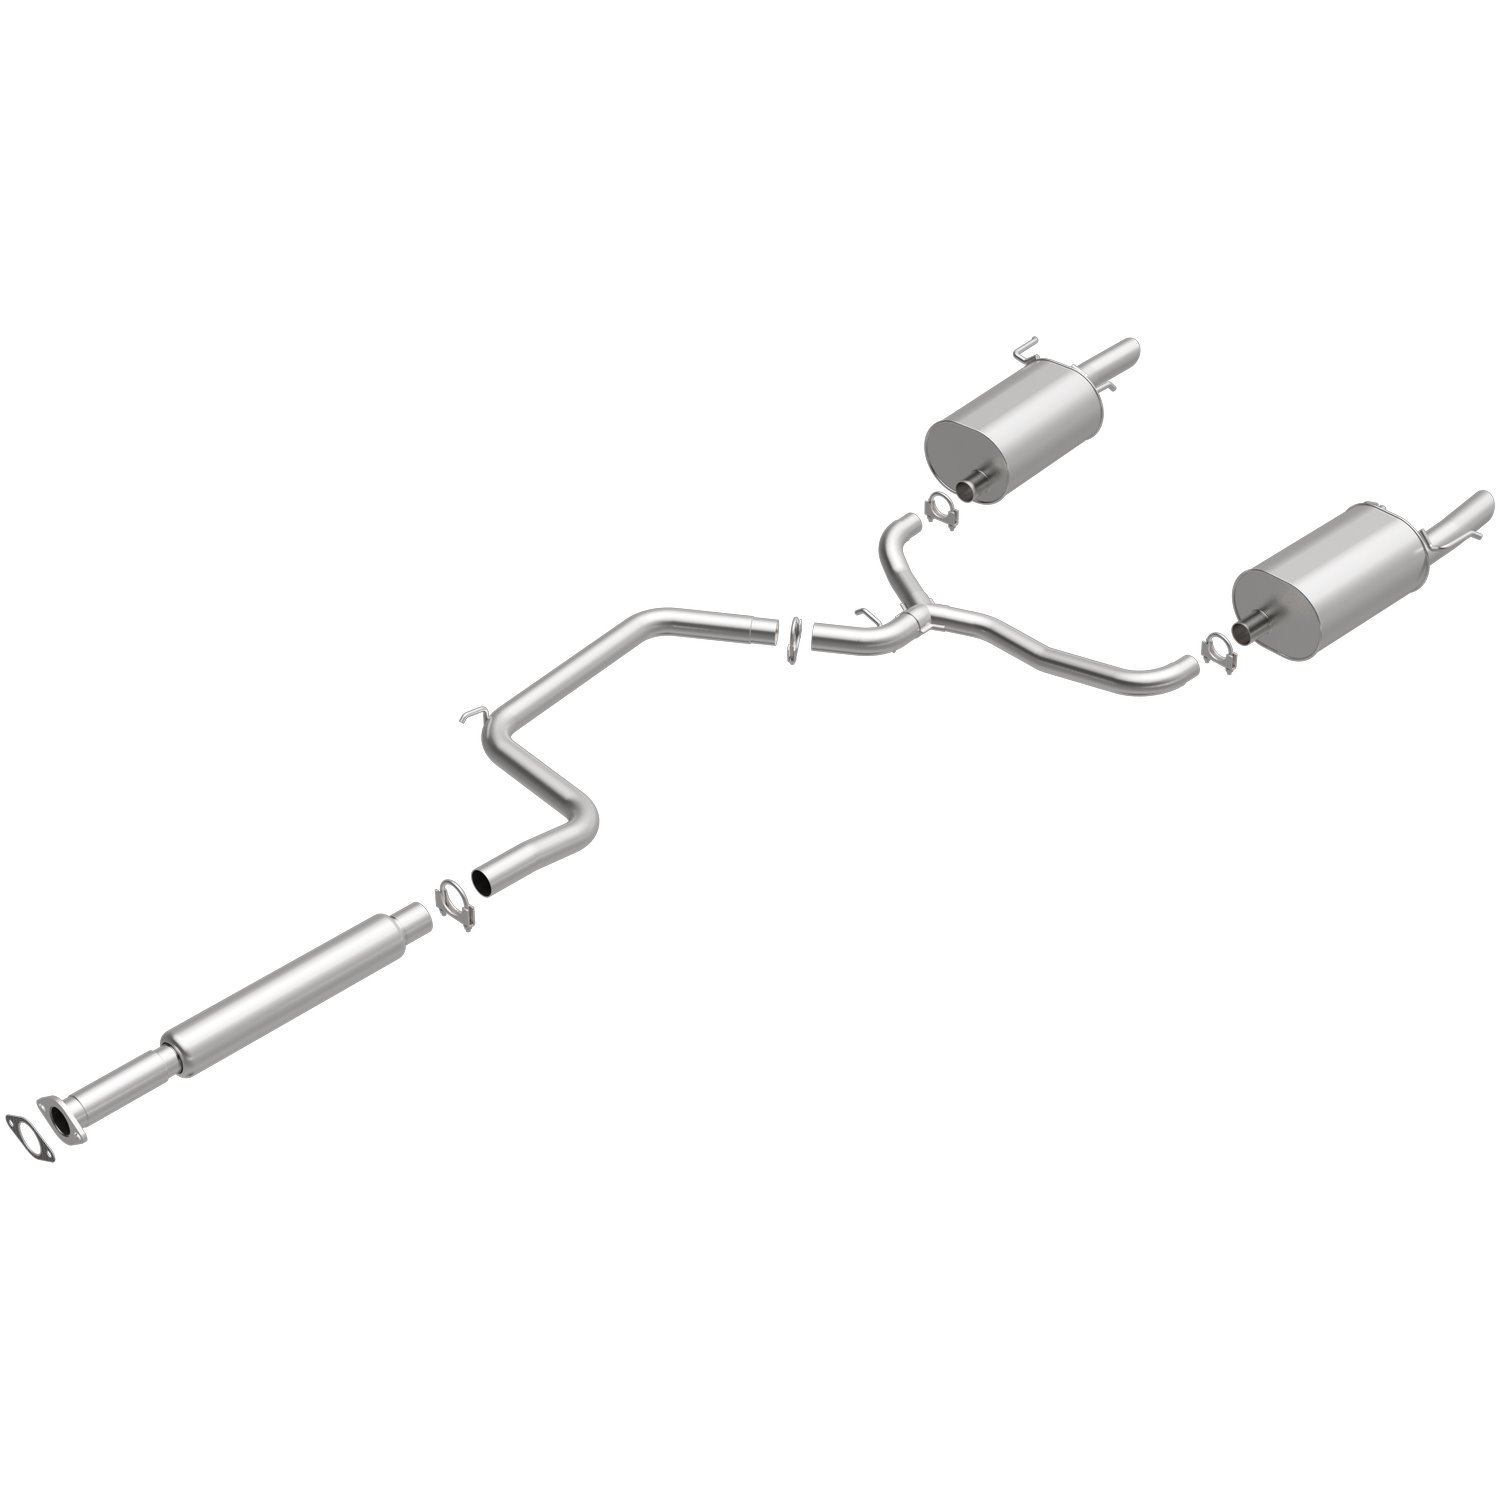 Direct-Fit Exhaust Kit, 2000-2002 Chevy Monte Carlo 3.8L